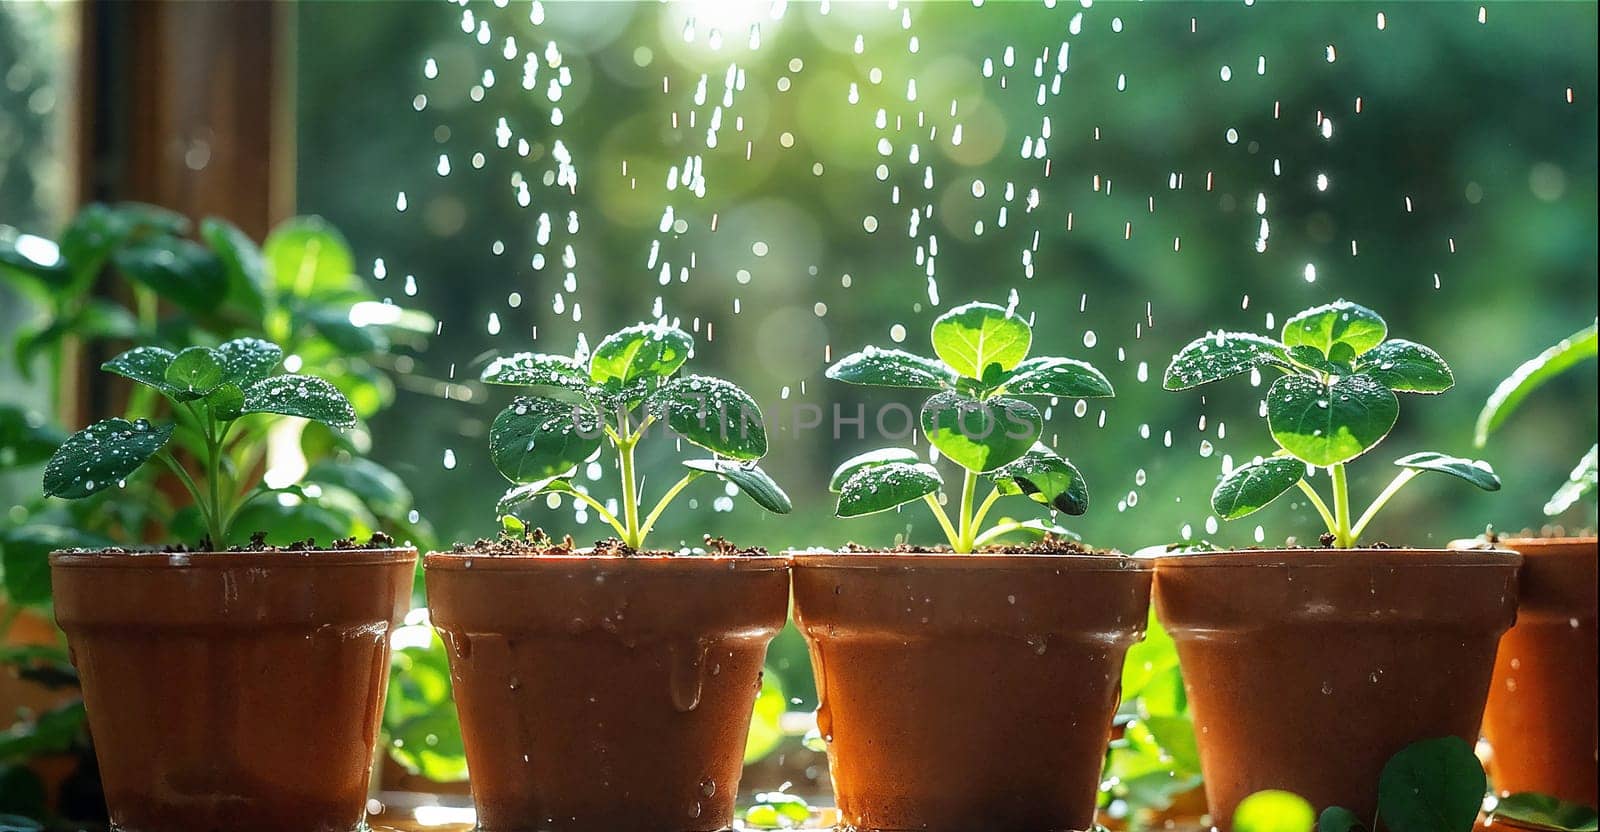 Potted plants arranged on the windowsill, with water droplets on leaves. by evdakovka